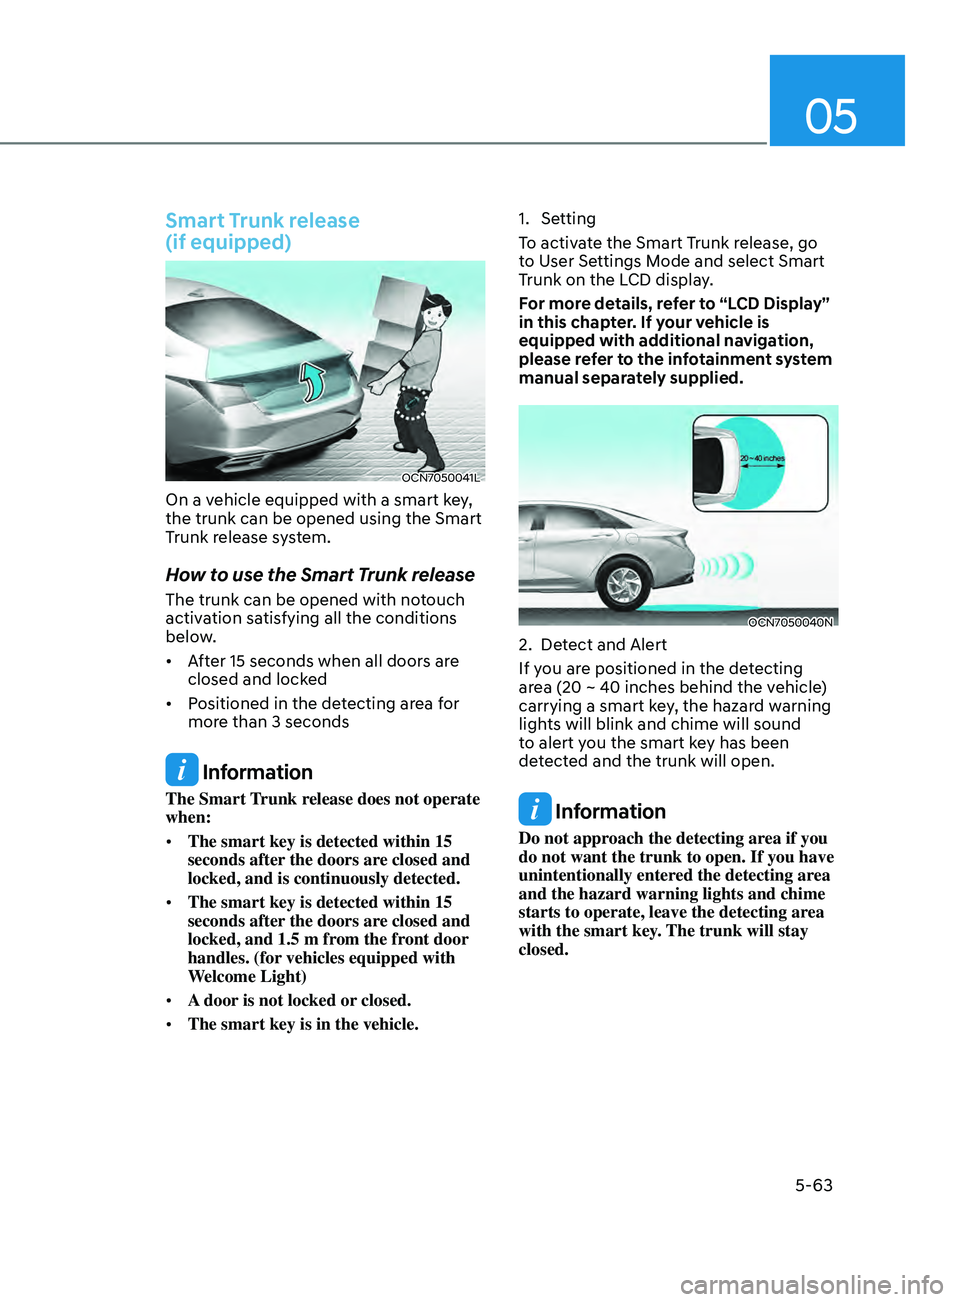 HYUNDAI ELANTRA SEL 2021  Owners Manual 05
5-63
Smart Trunk release  
(if equipped)
OCN7050041L
On a vehicle equipped with a smart key, 
the trunk can be opened using the Smart 
Trunk release system.
How to use the Smart Trunk release
The t